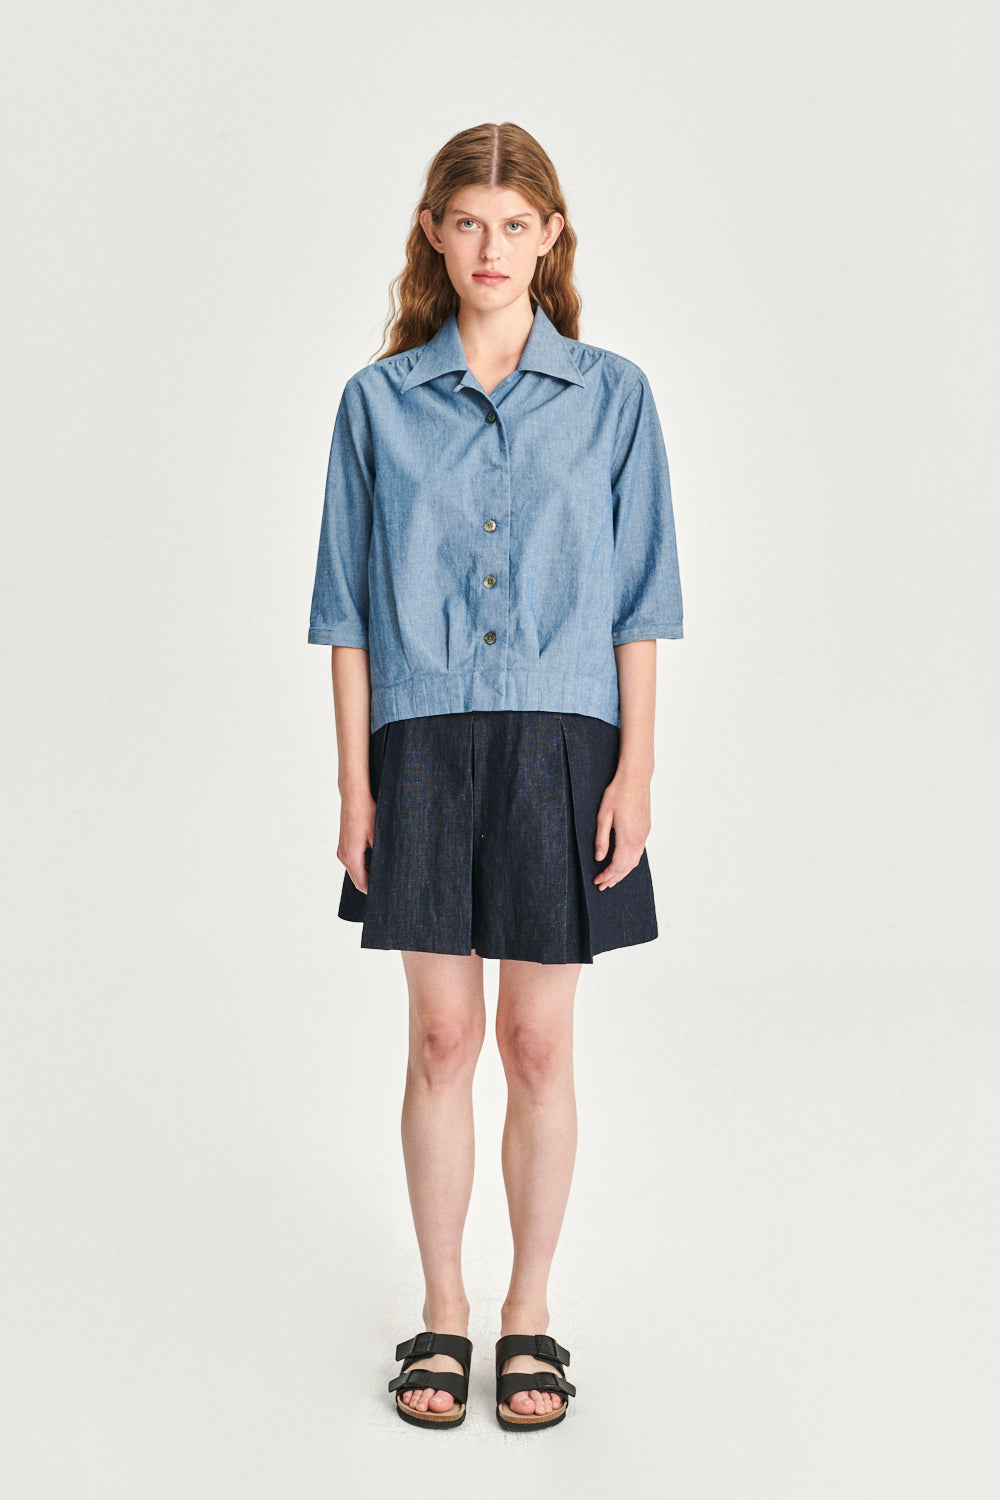 Blouse Jacket in a Indigo Dyed Mix of Linen and Cotton